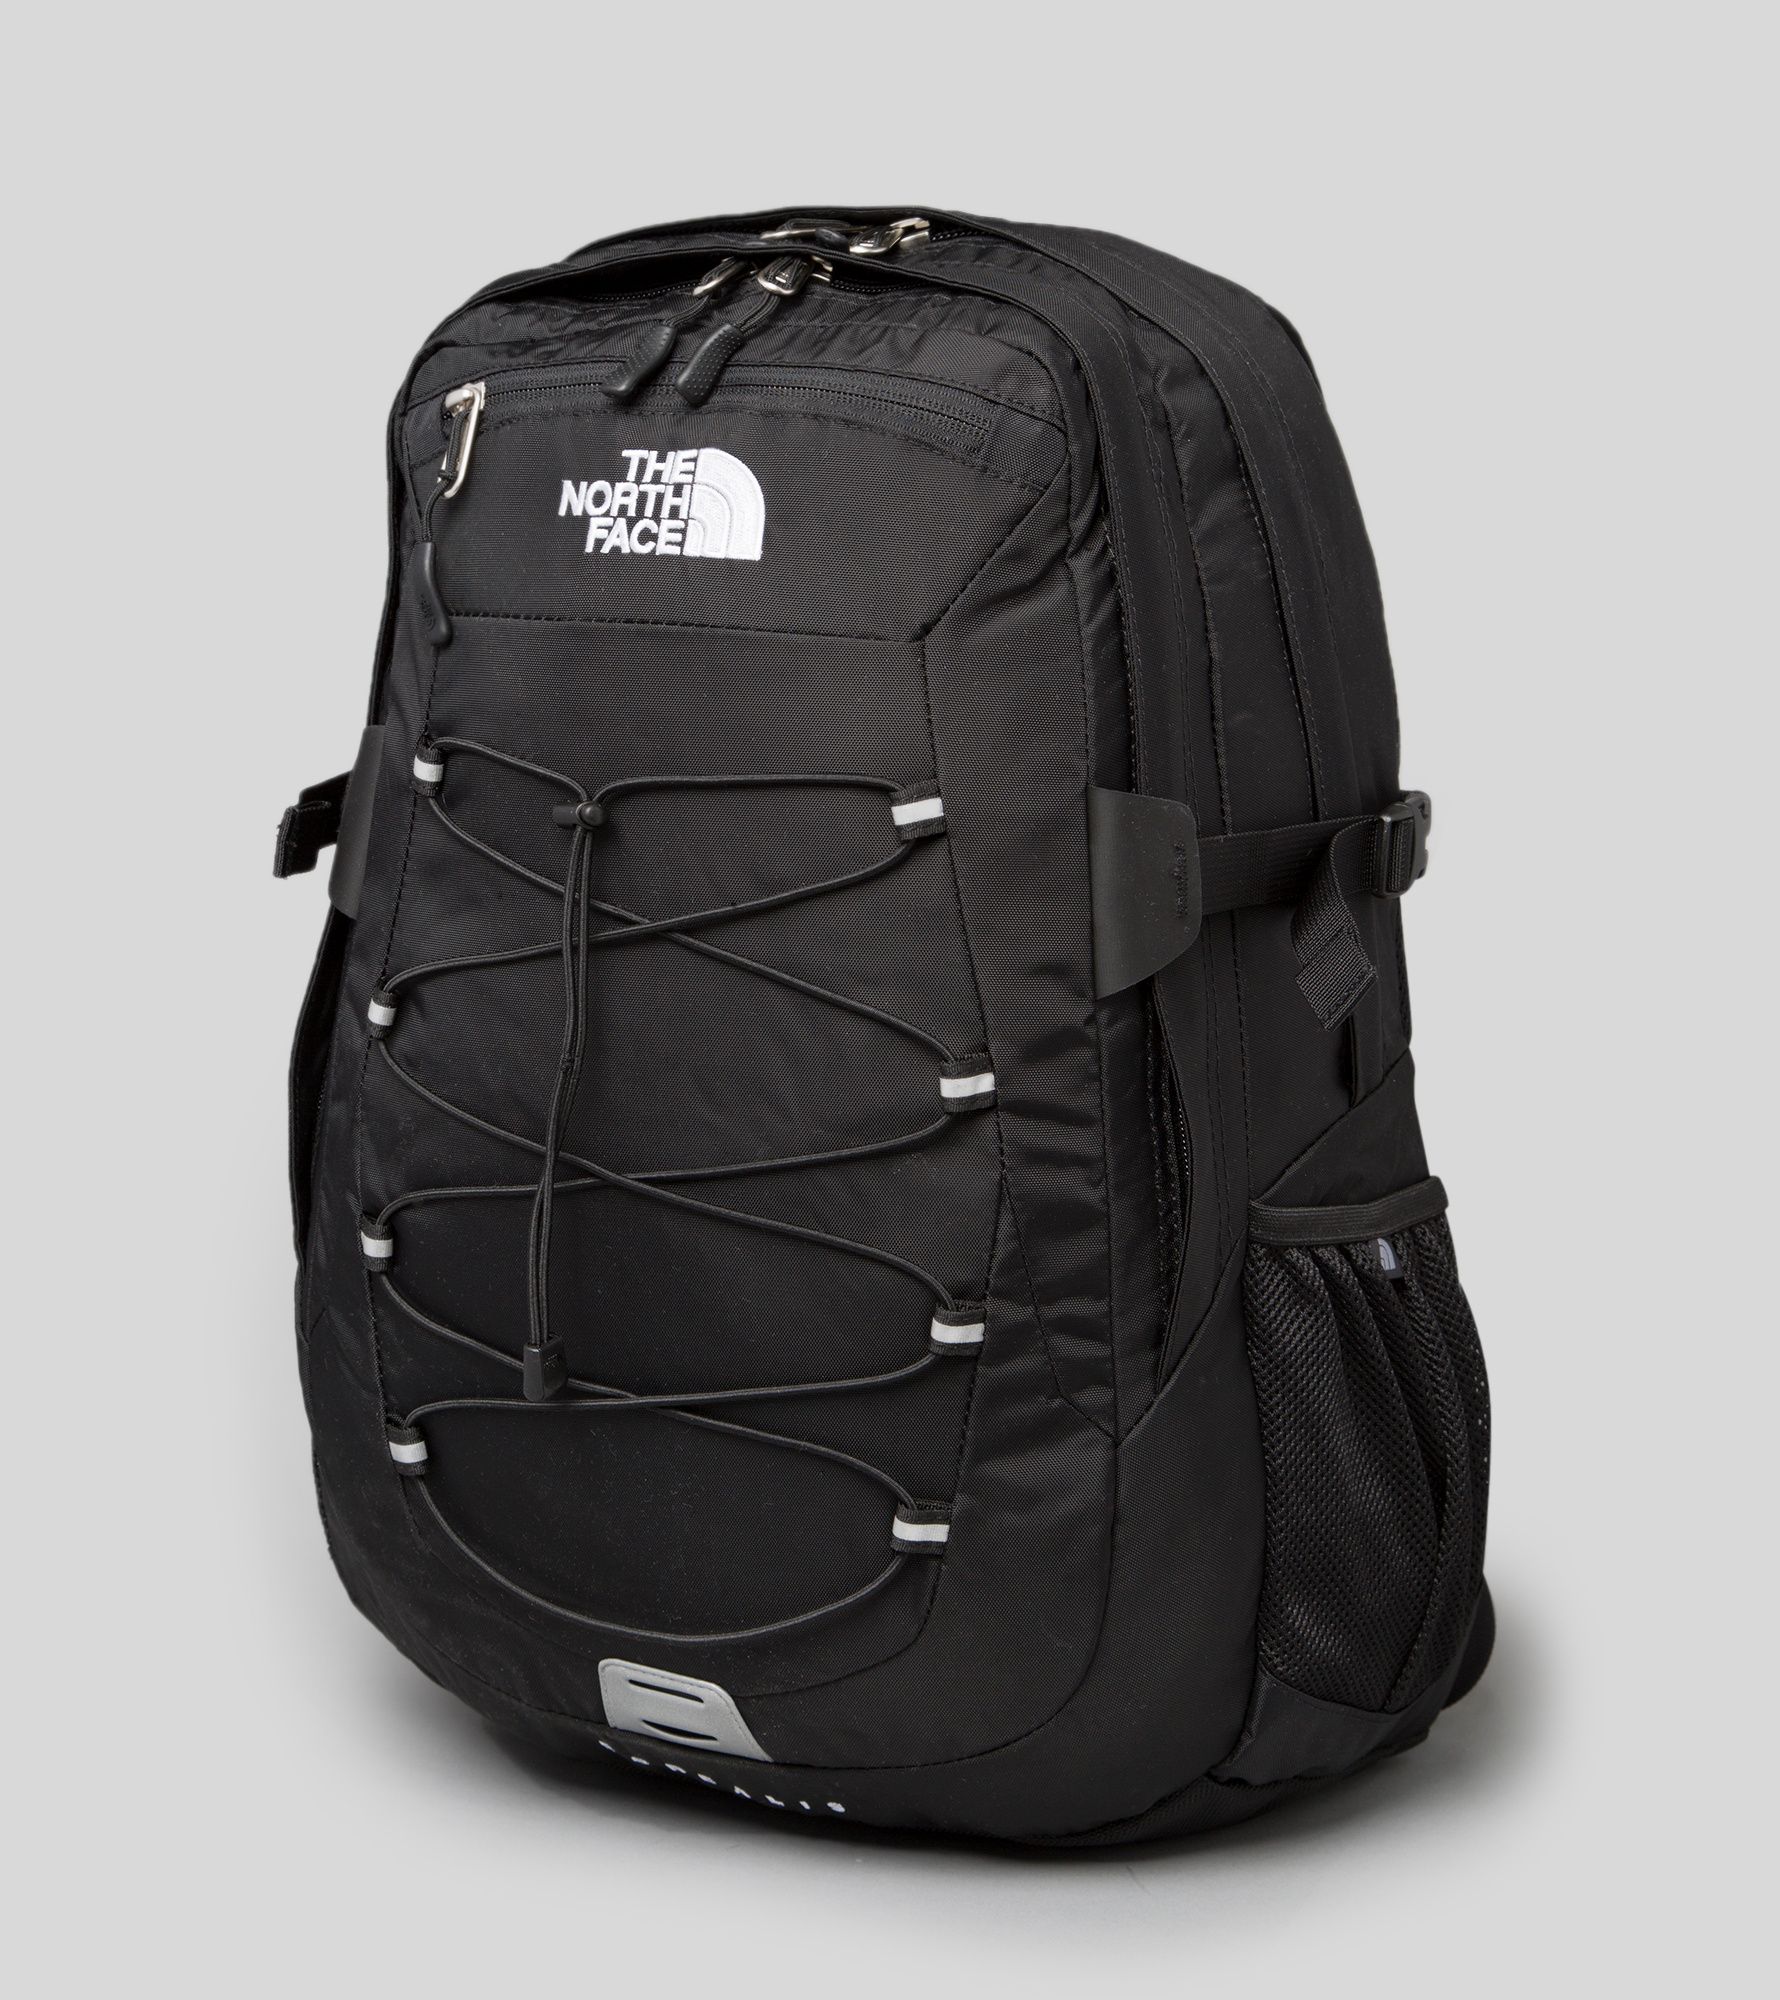 The North Face Borealis Backpack Size?